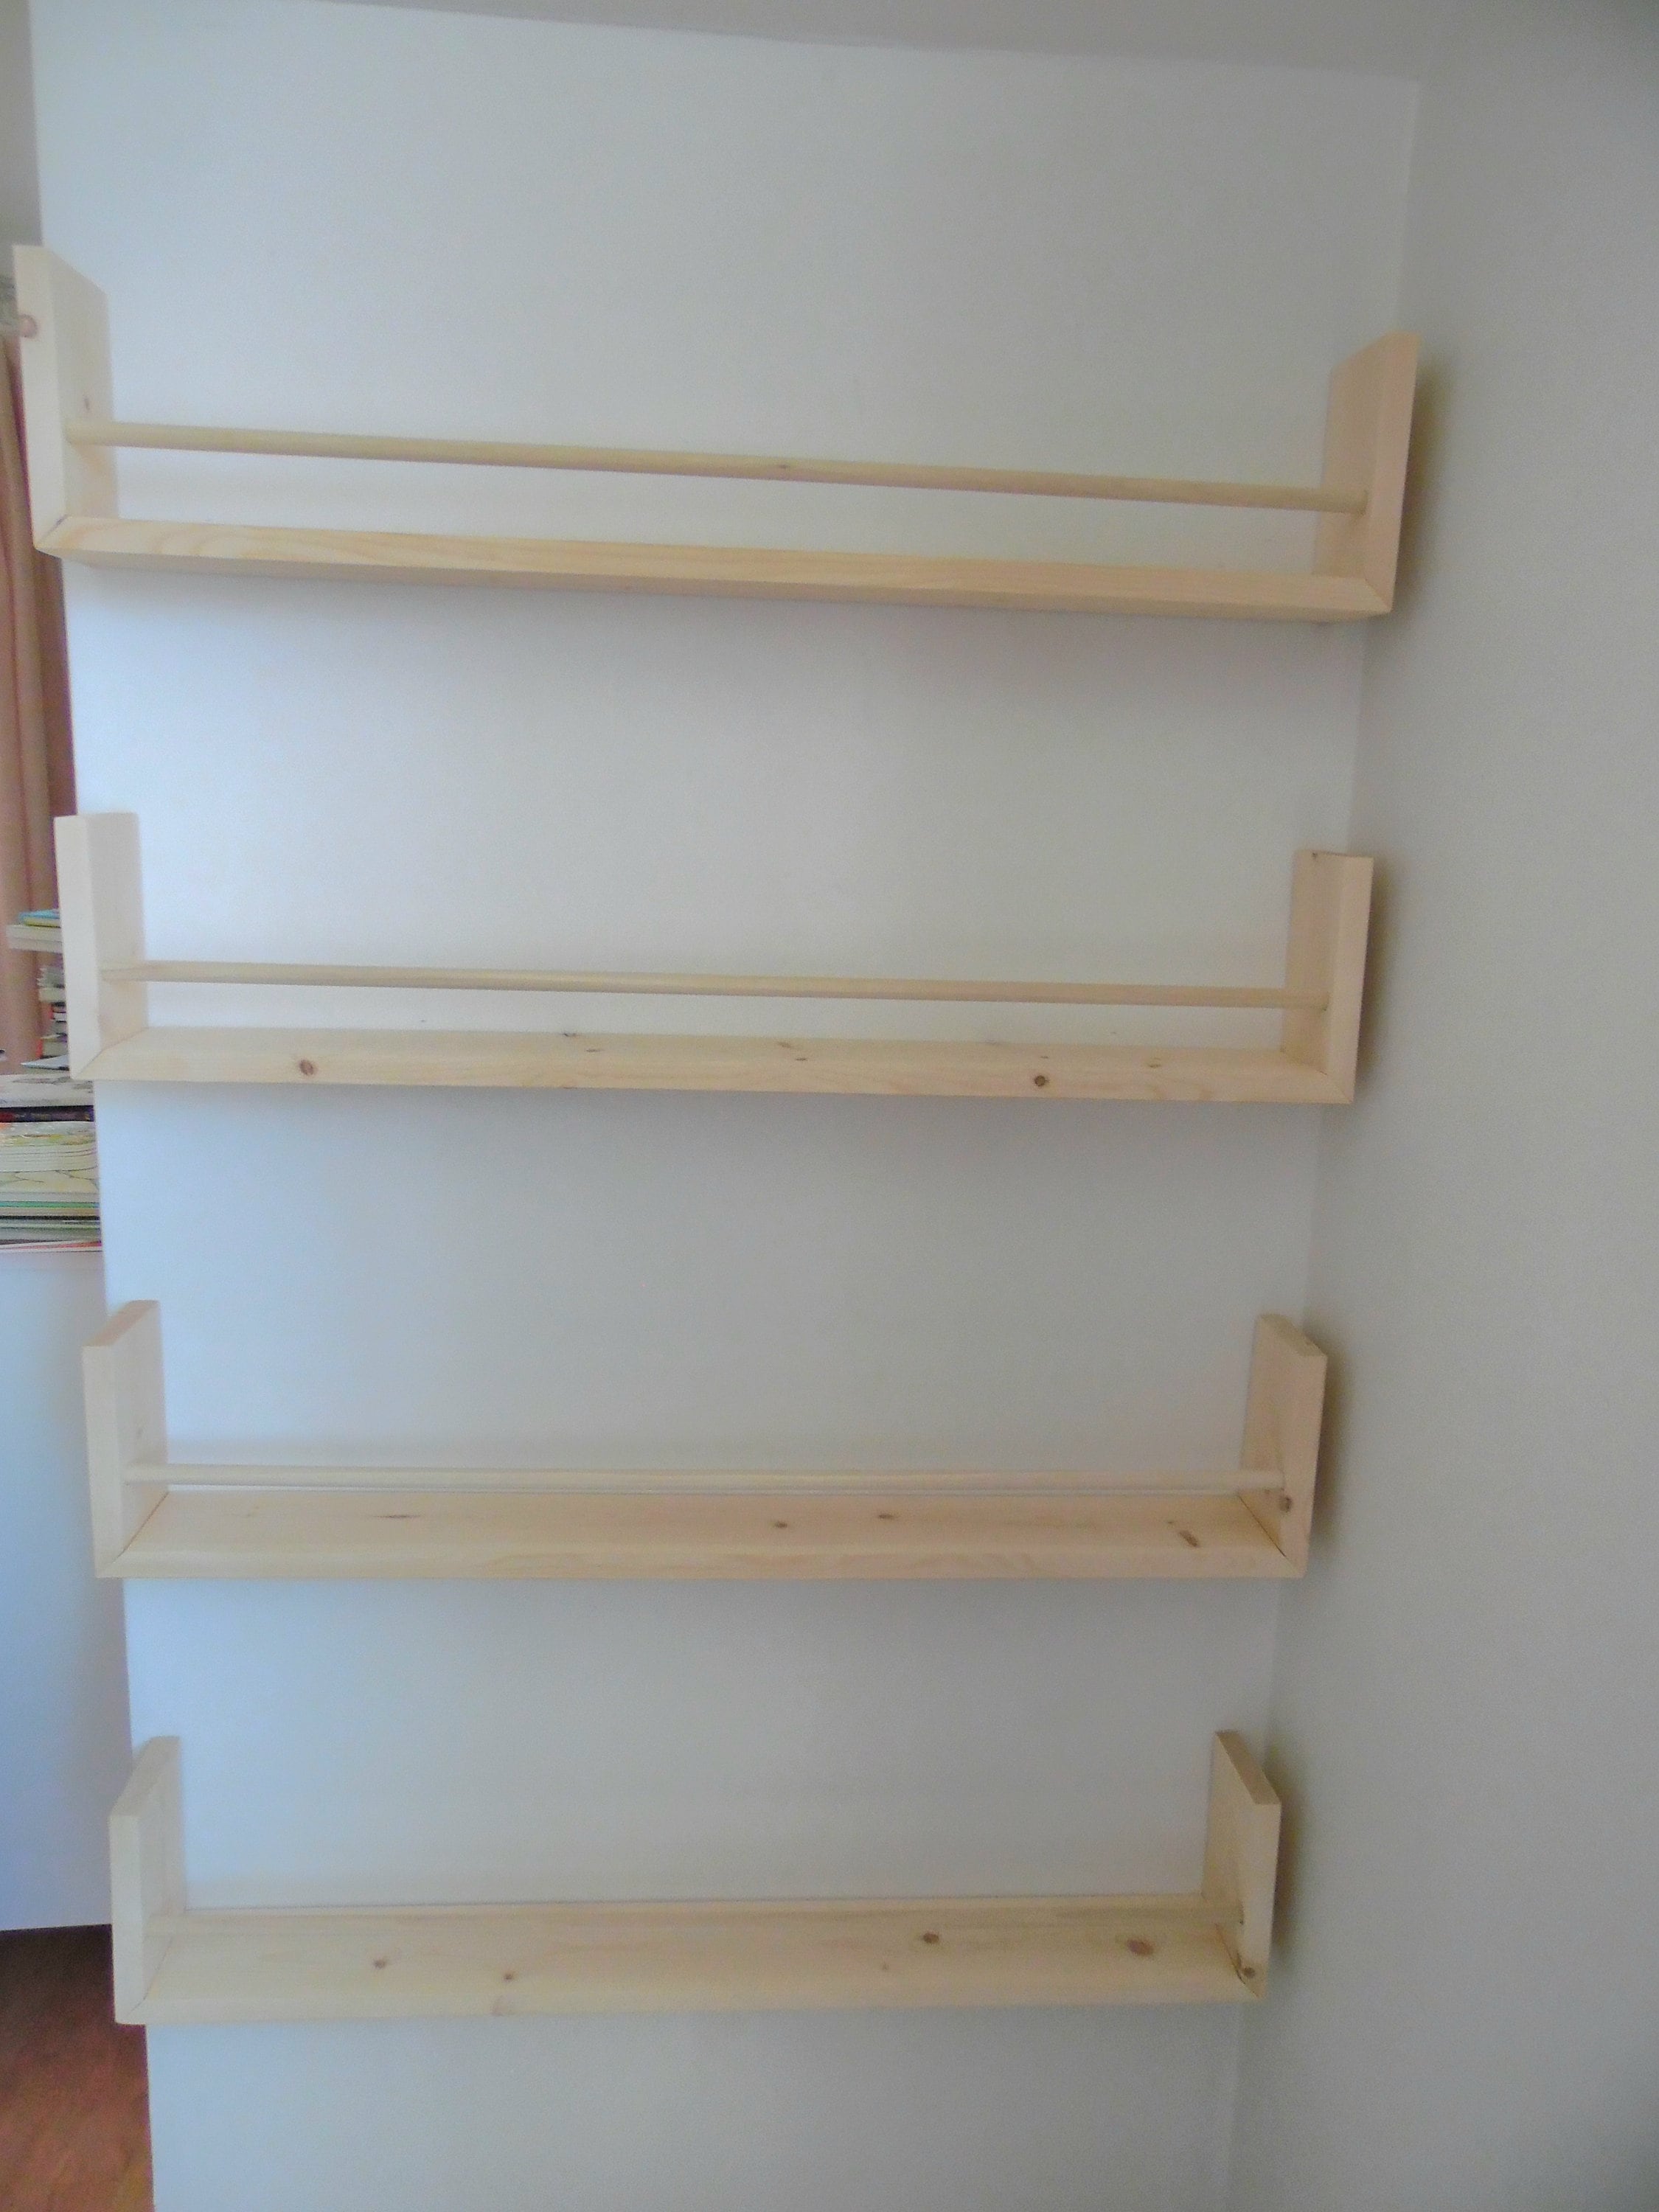 Nursery Bookshelf Natural Pine and Painted Bar, Small Space Shelf, Joinery  